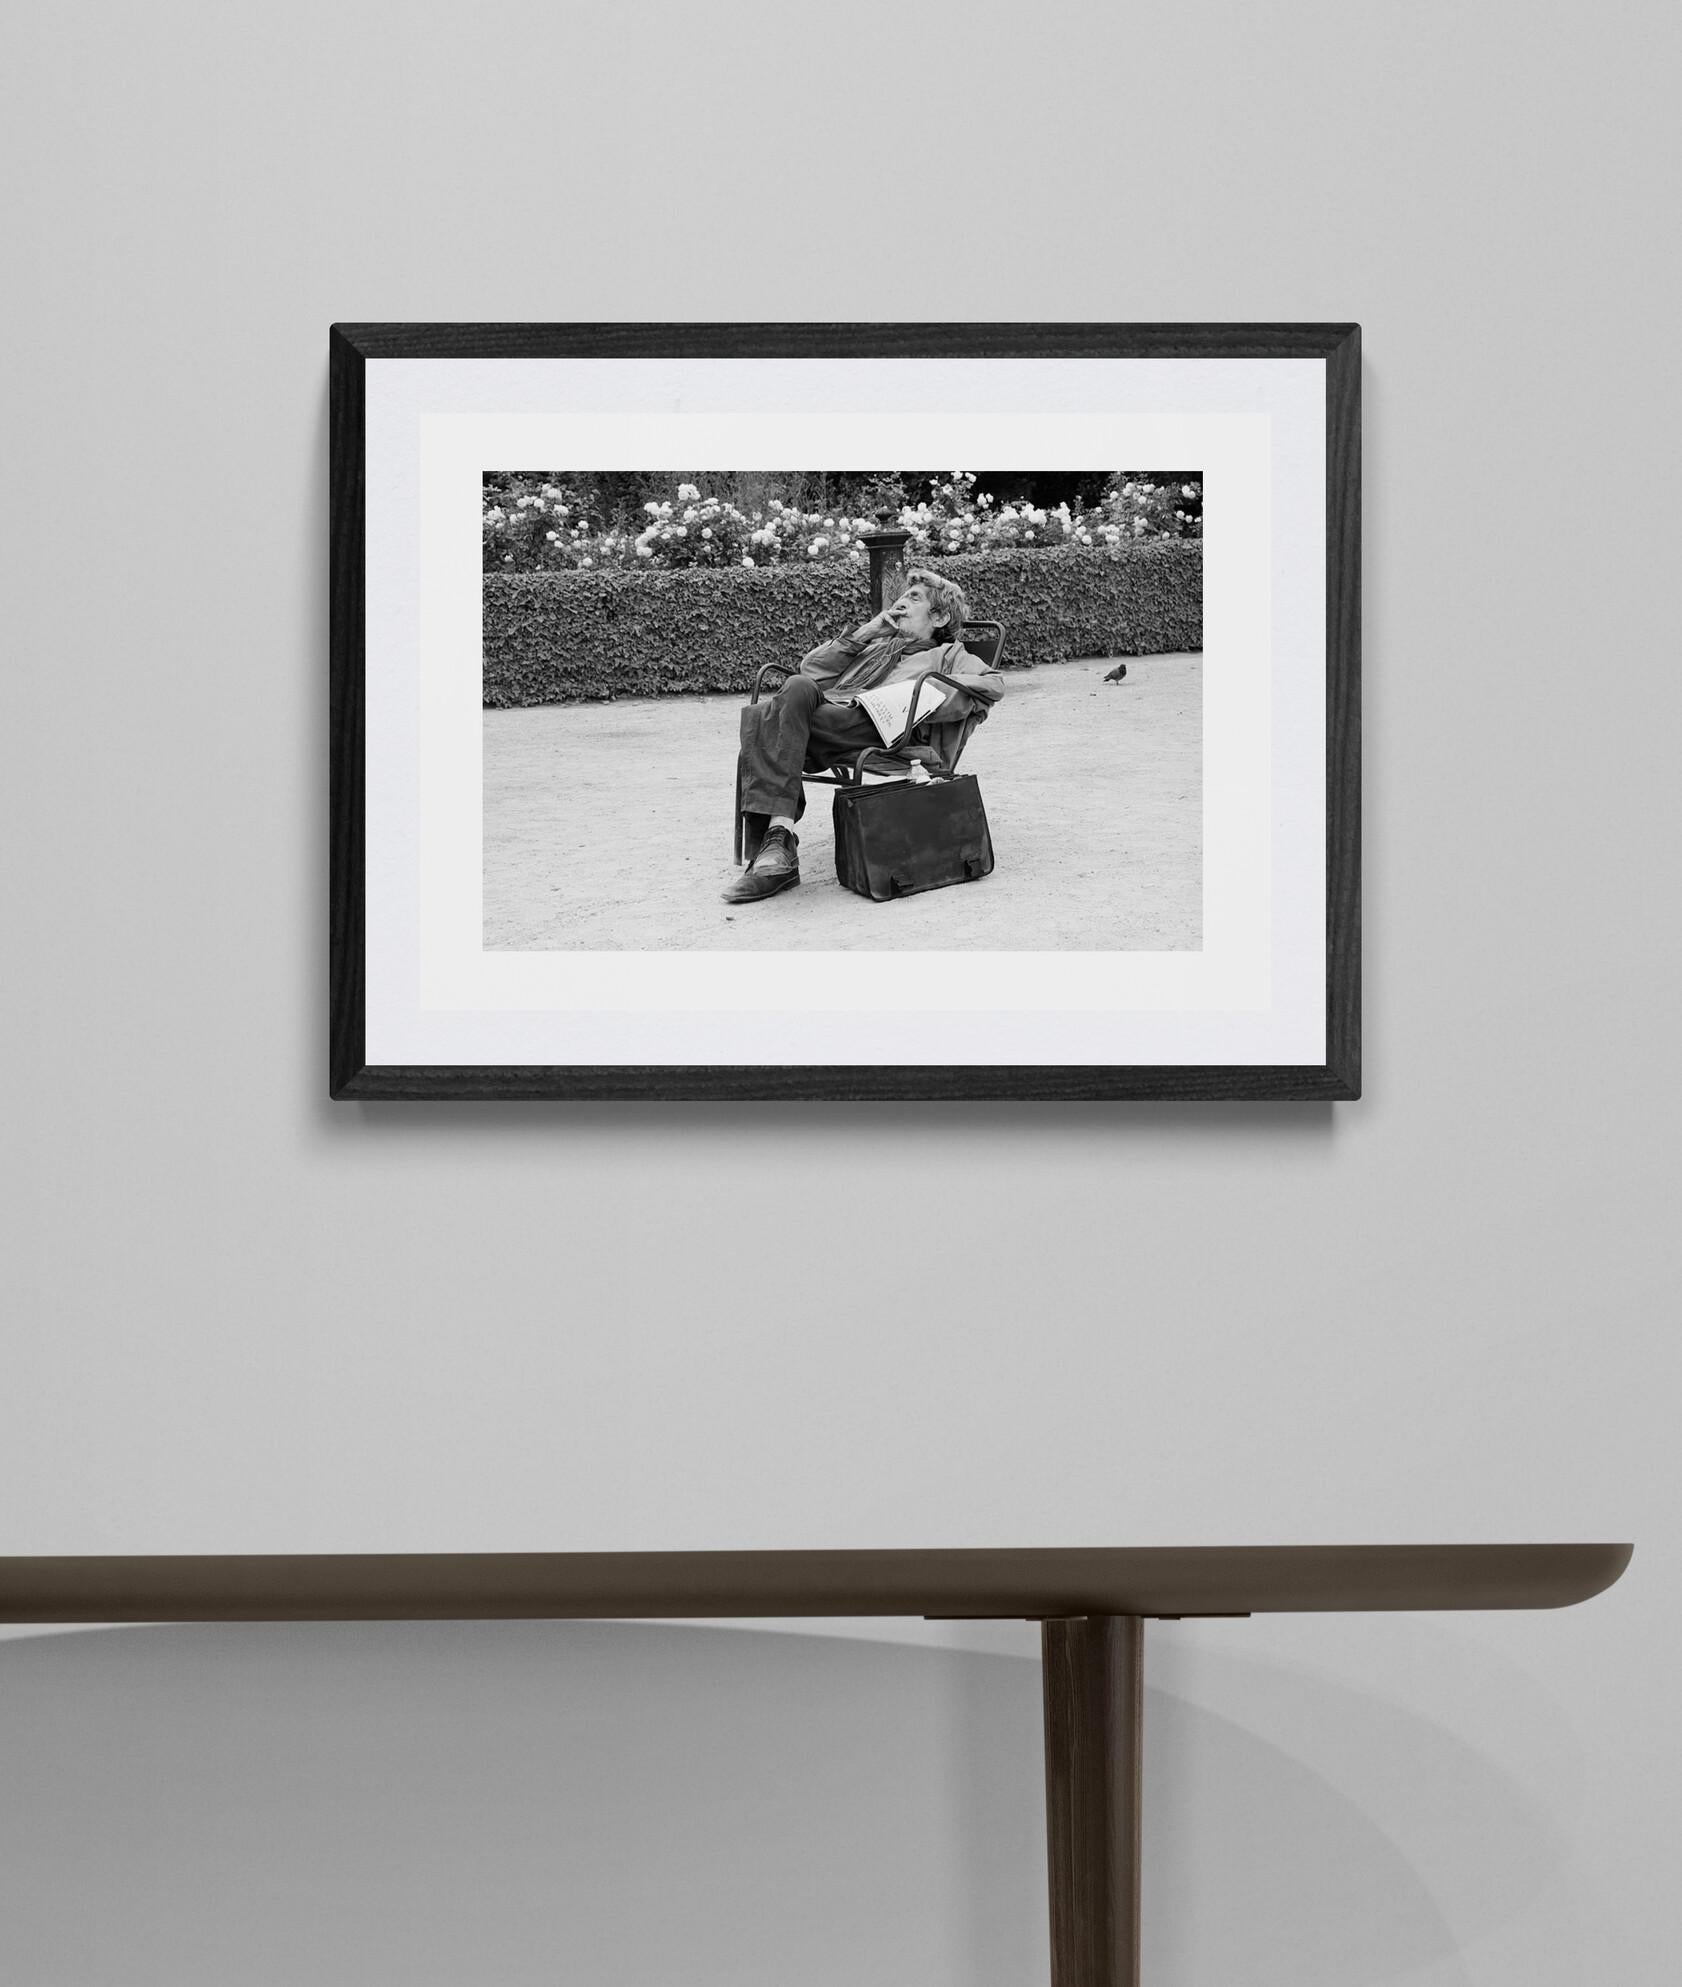 A limited edition (out of 25) black and white photographic print. Framed with a black or white box frame and floated to the backboard. The dimensions of 33.5 x 47.2 cm is that of the paper itself, excluding the size of the frame. Contact us for